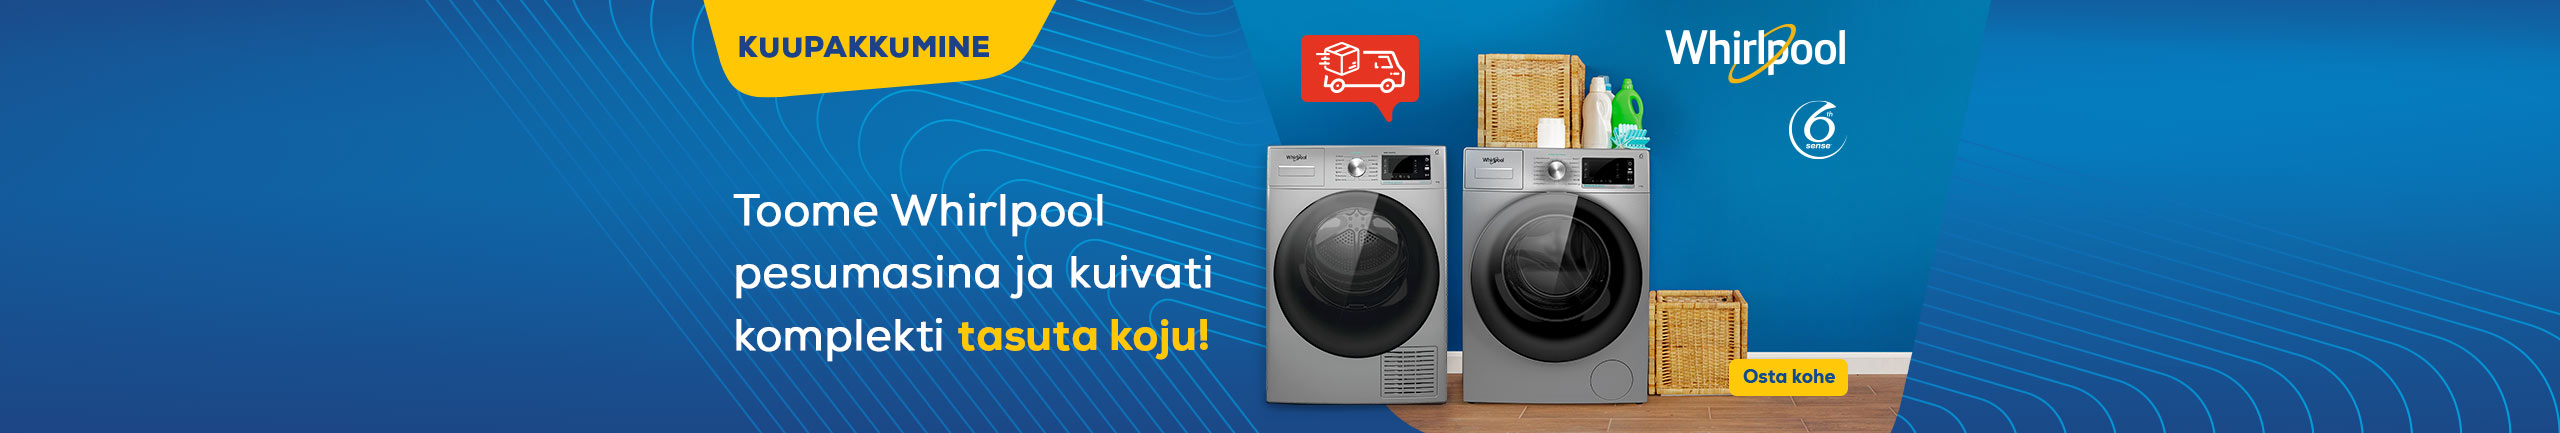 Free delivery for Whirlpool washer-dryer set!